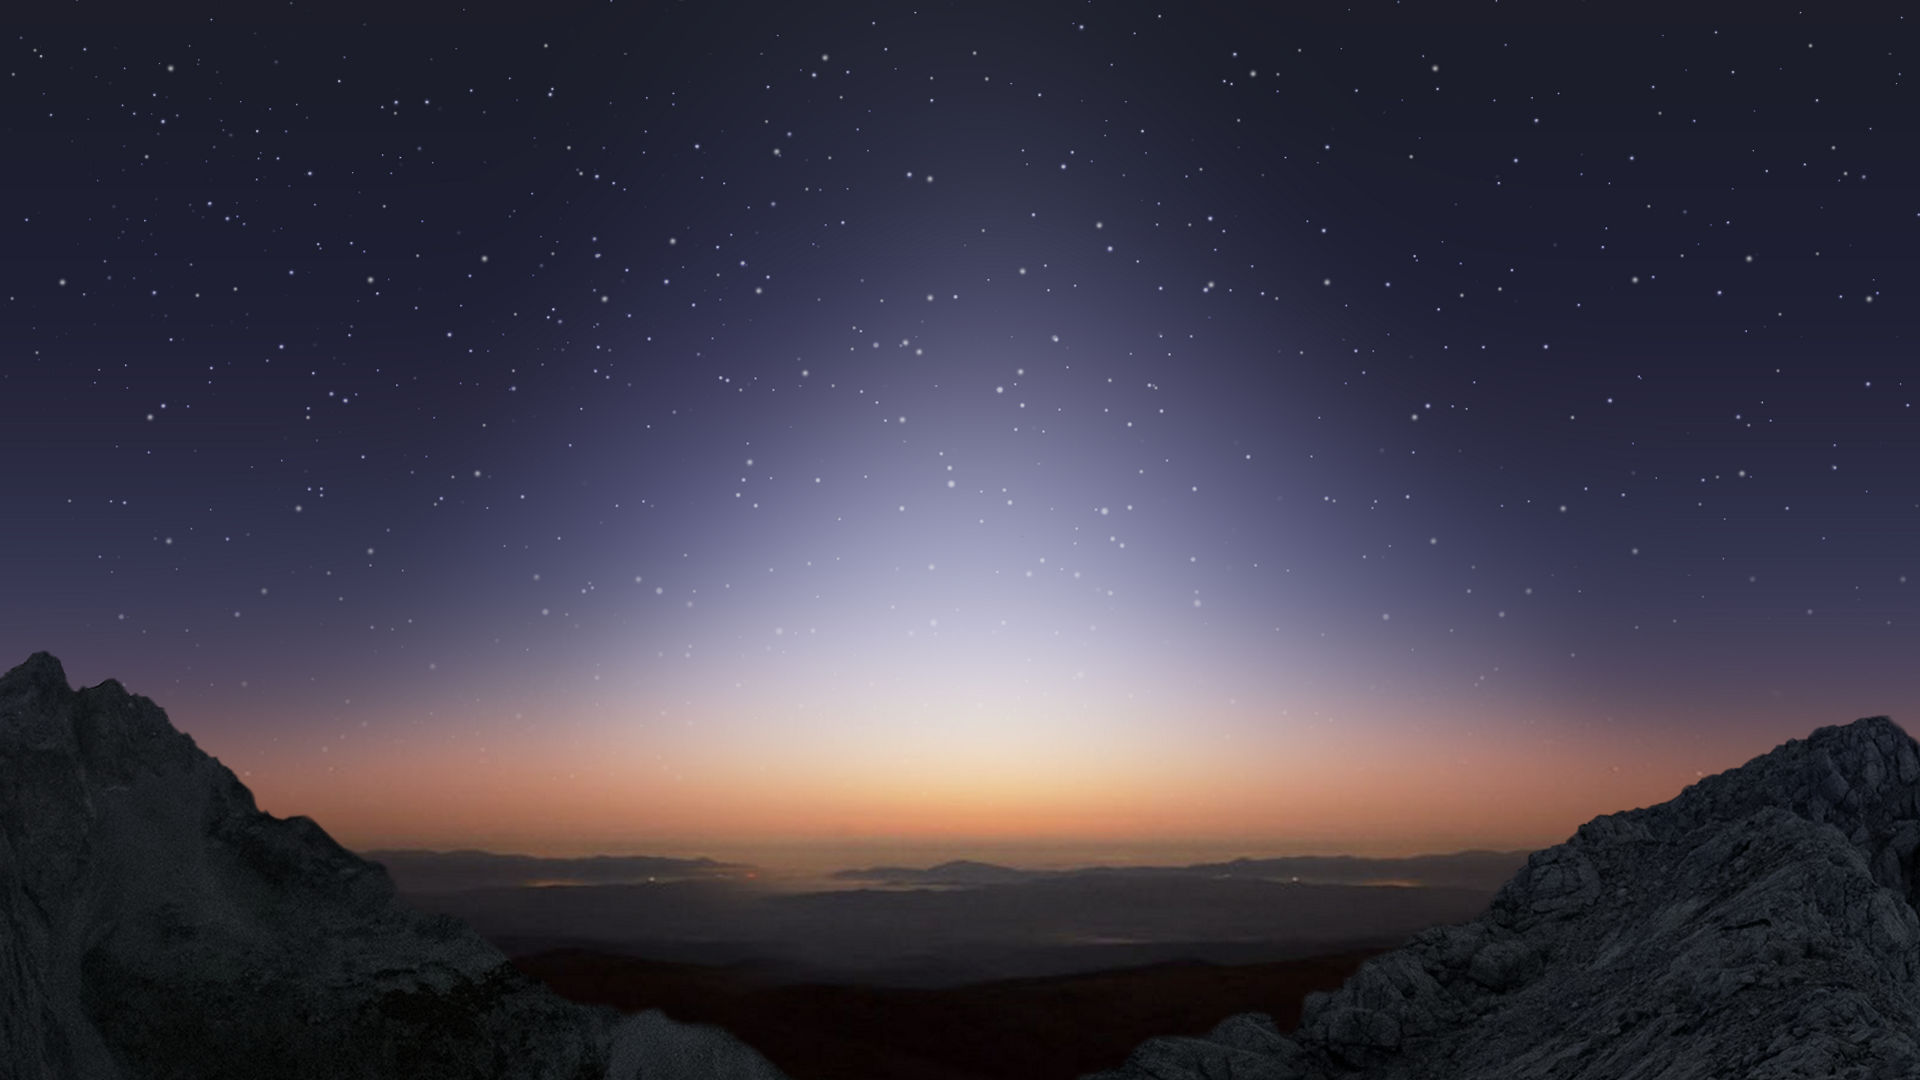 It’s Time to See the Zodiacal Light